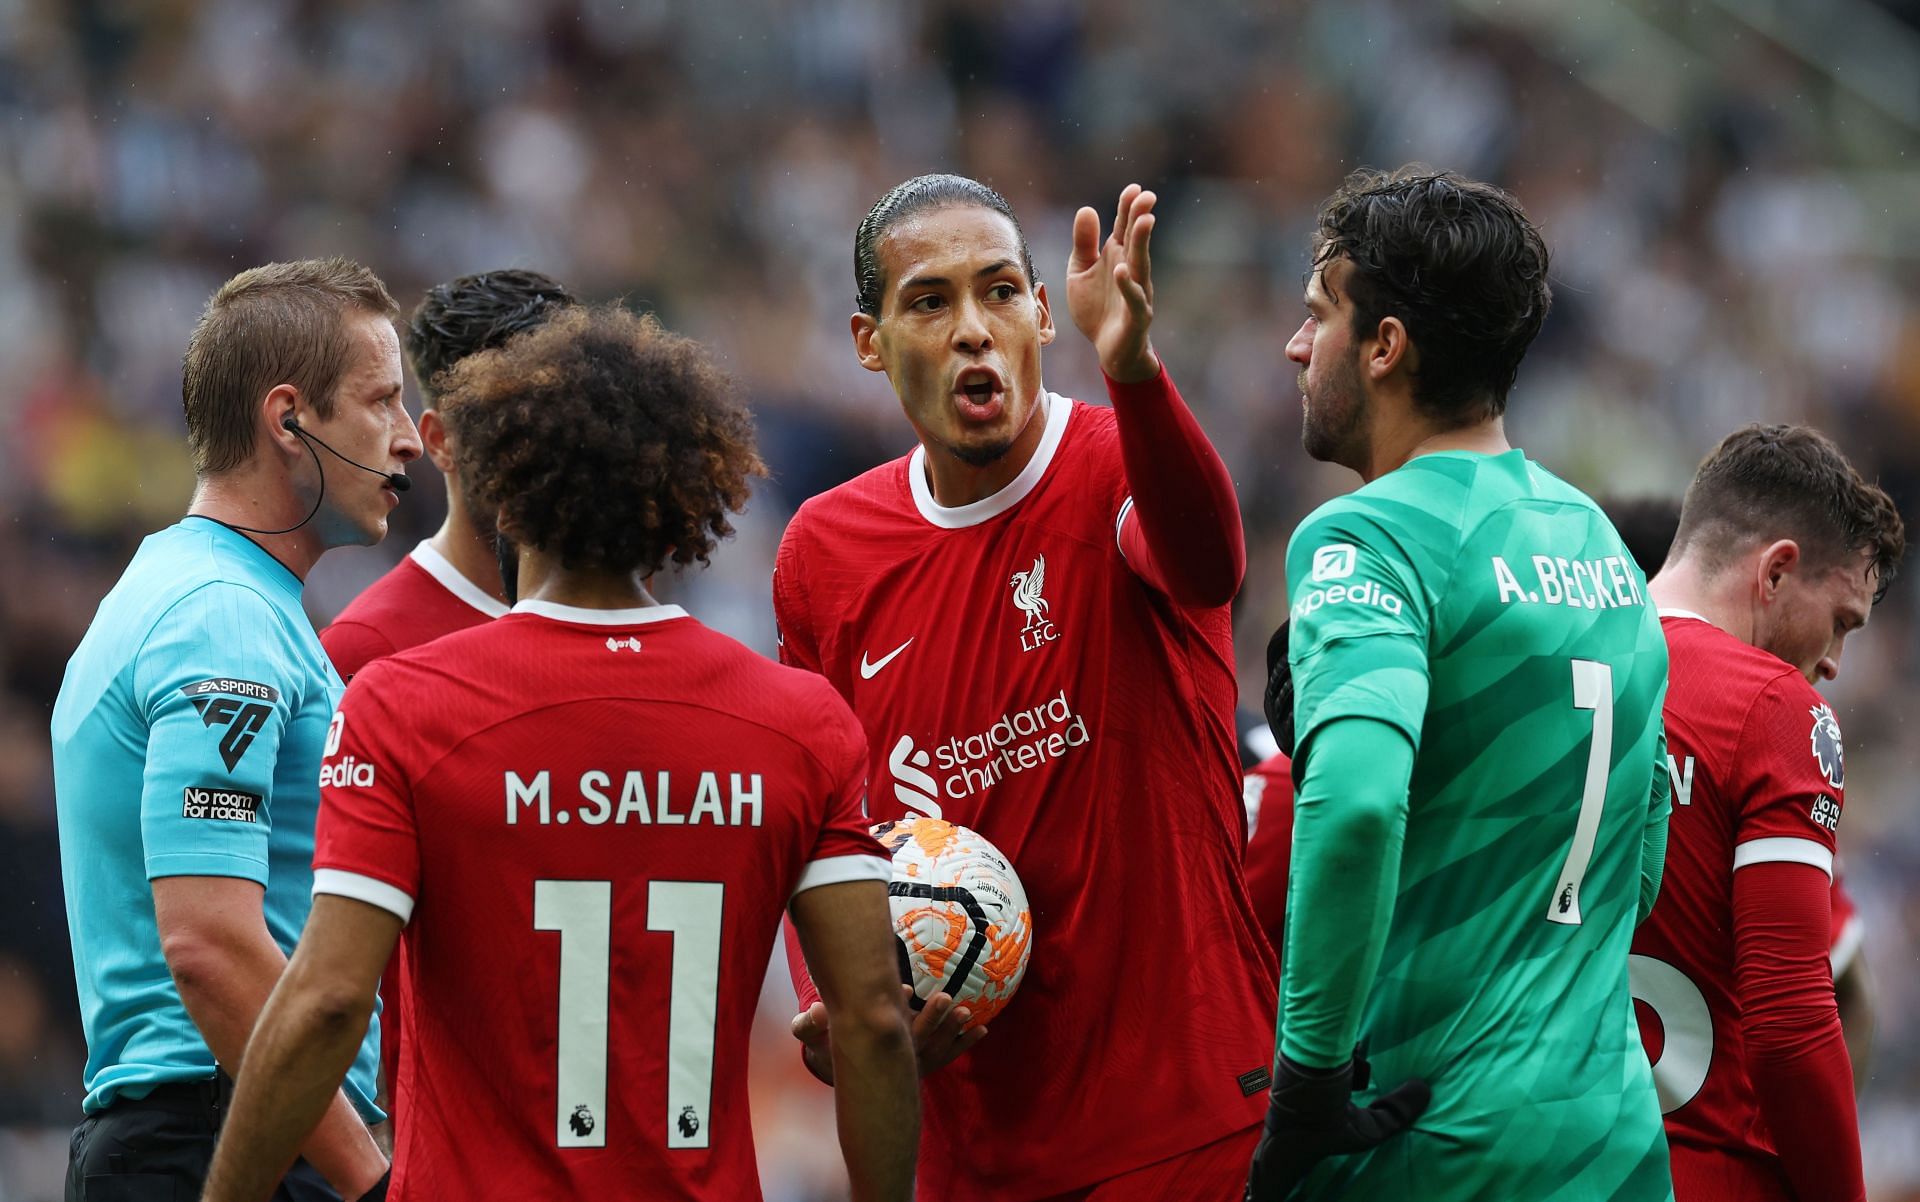 Liverpool captain Virgil van Dijk in conversation with the referee after a red card decision.